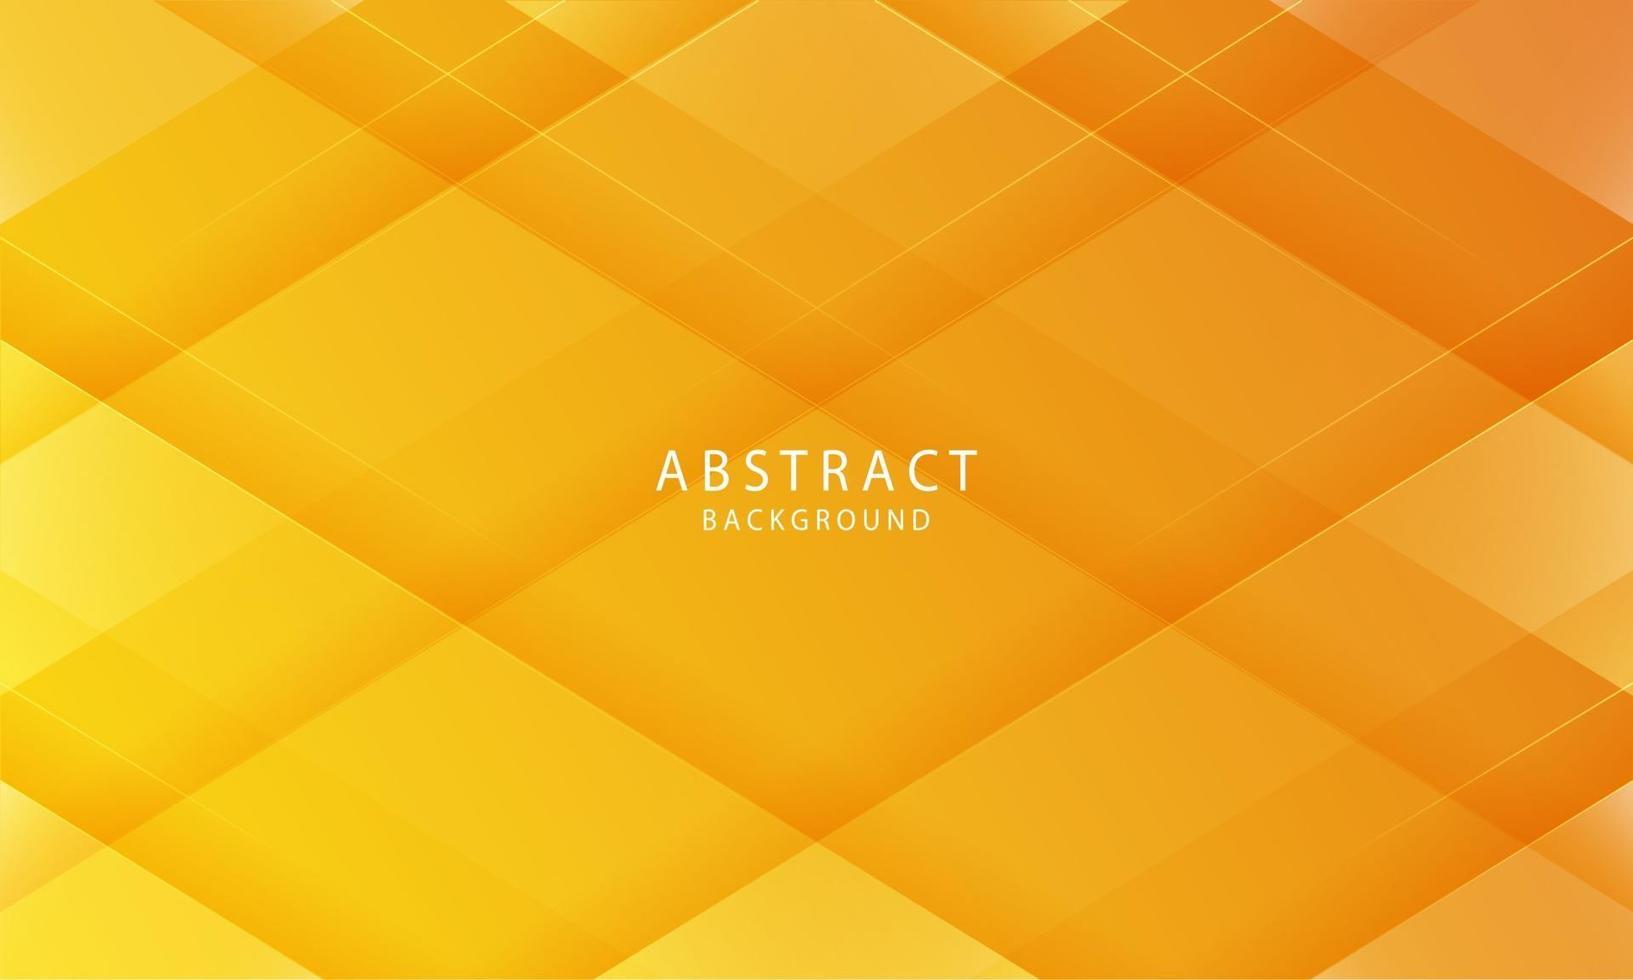 Abstract Orange Colored Background with Diagonal Stripes. Geometric Minimal Pattern. eps 10 vector